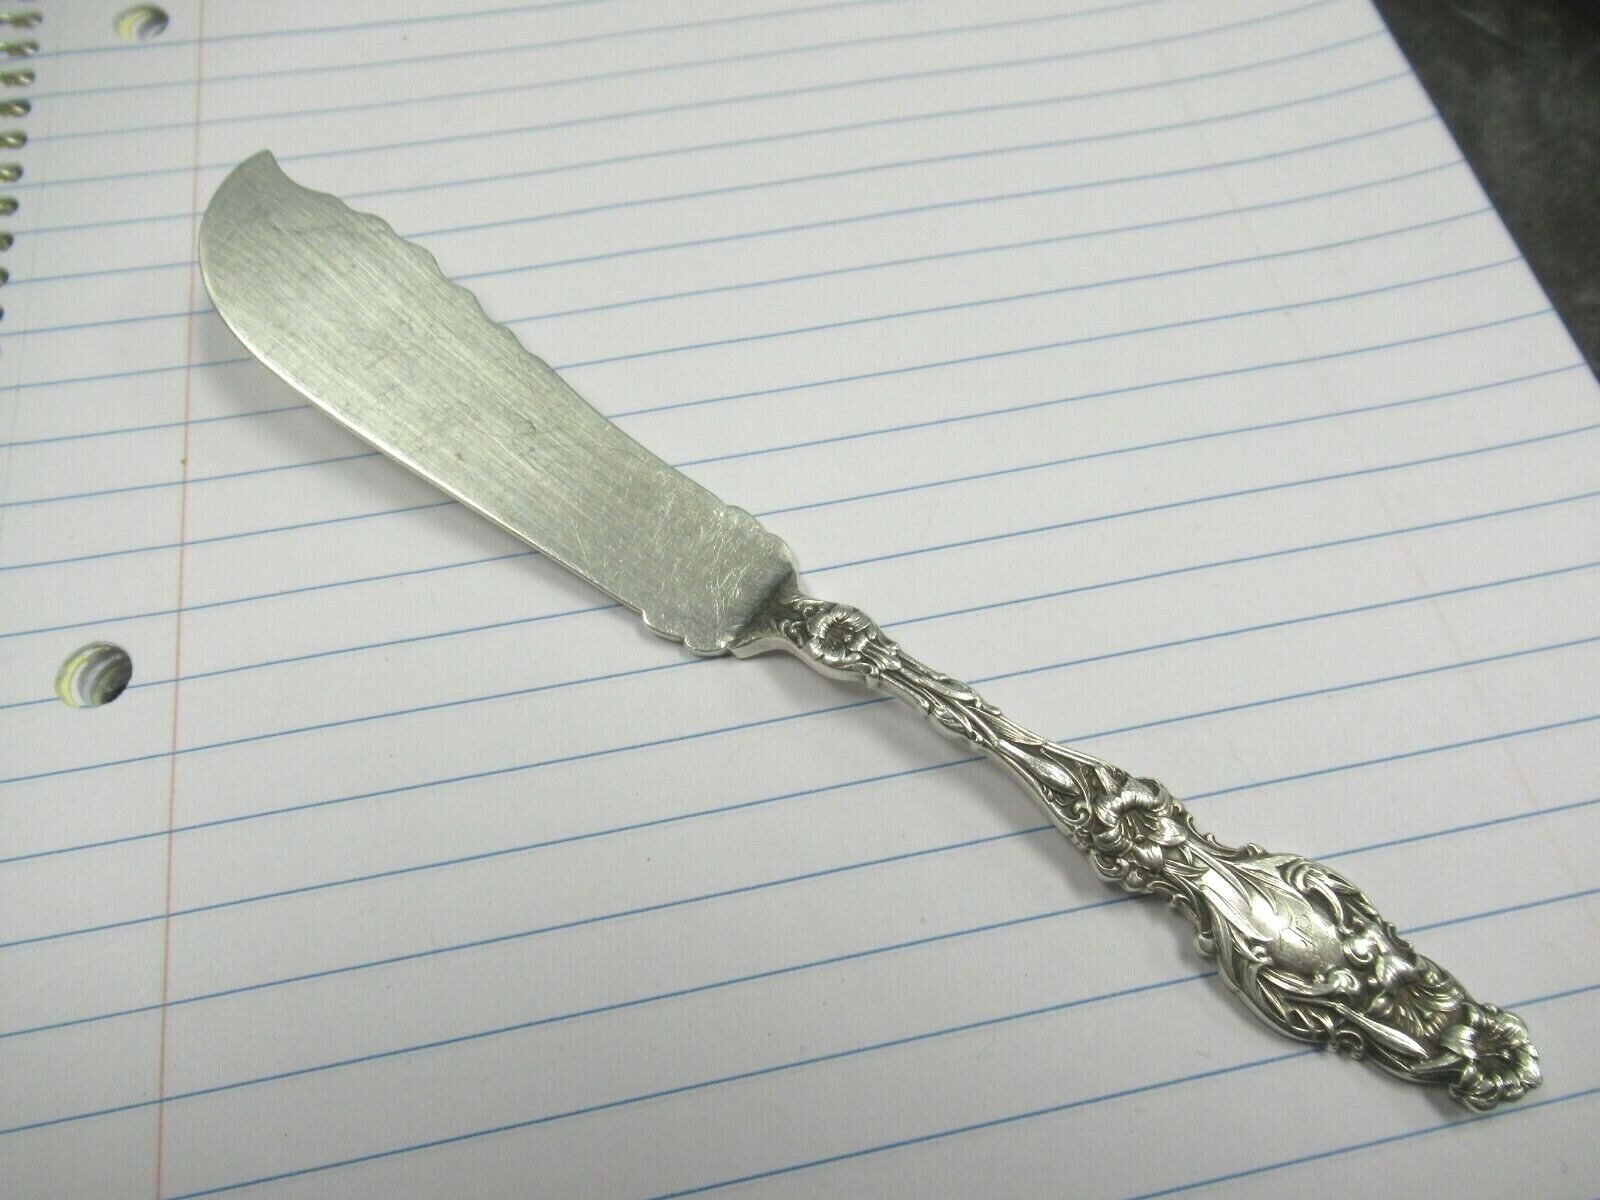 Pat 1902 Whiting Lily Sterling Silver Master Butter Knife 6 7/8" Nice BIN Price!